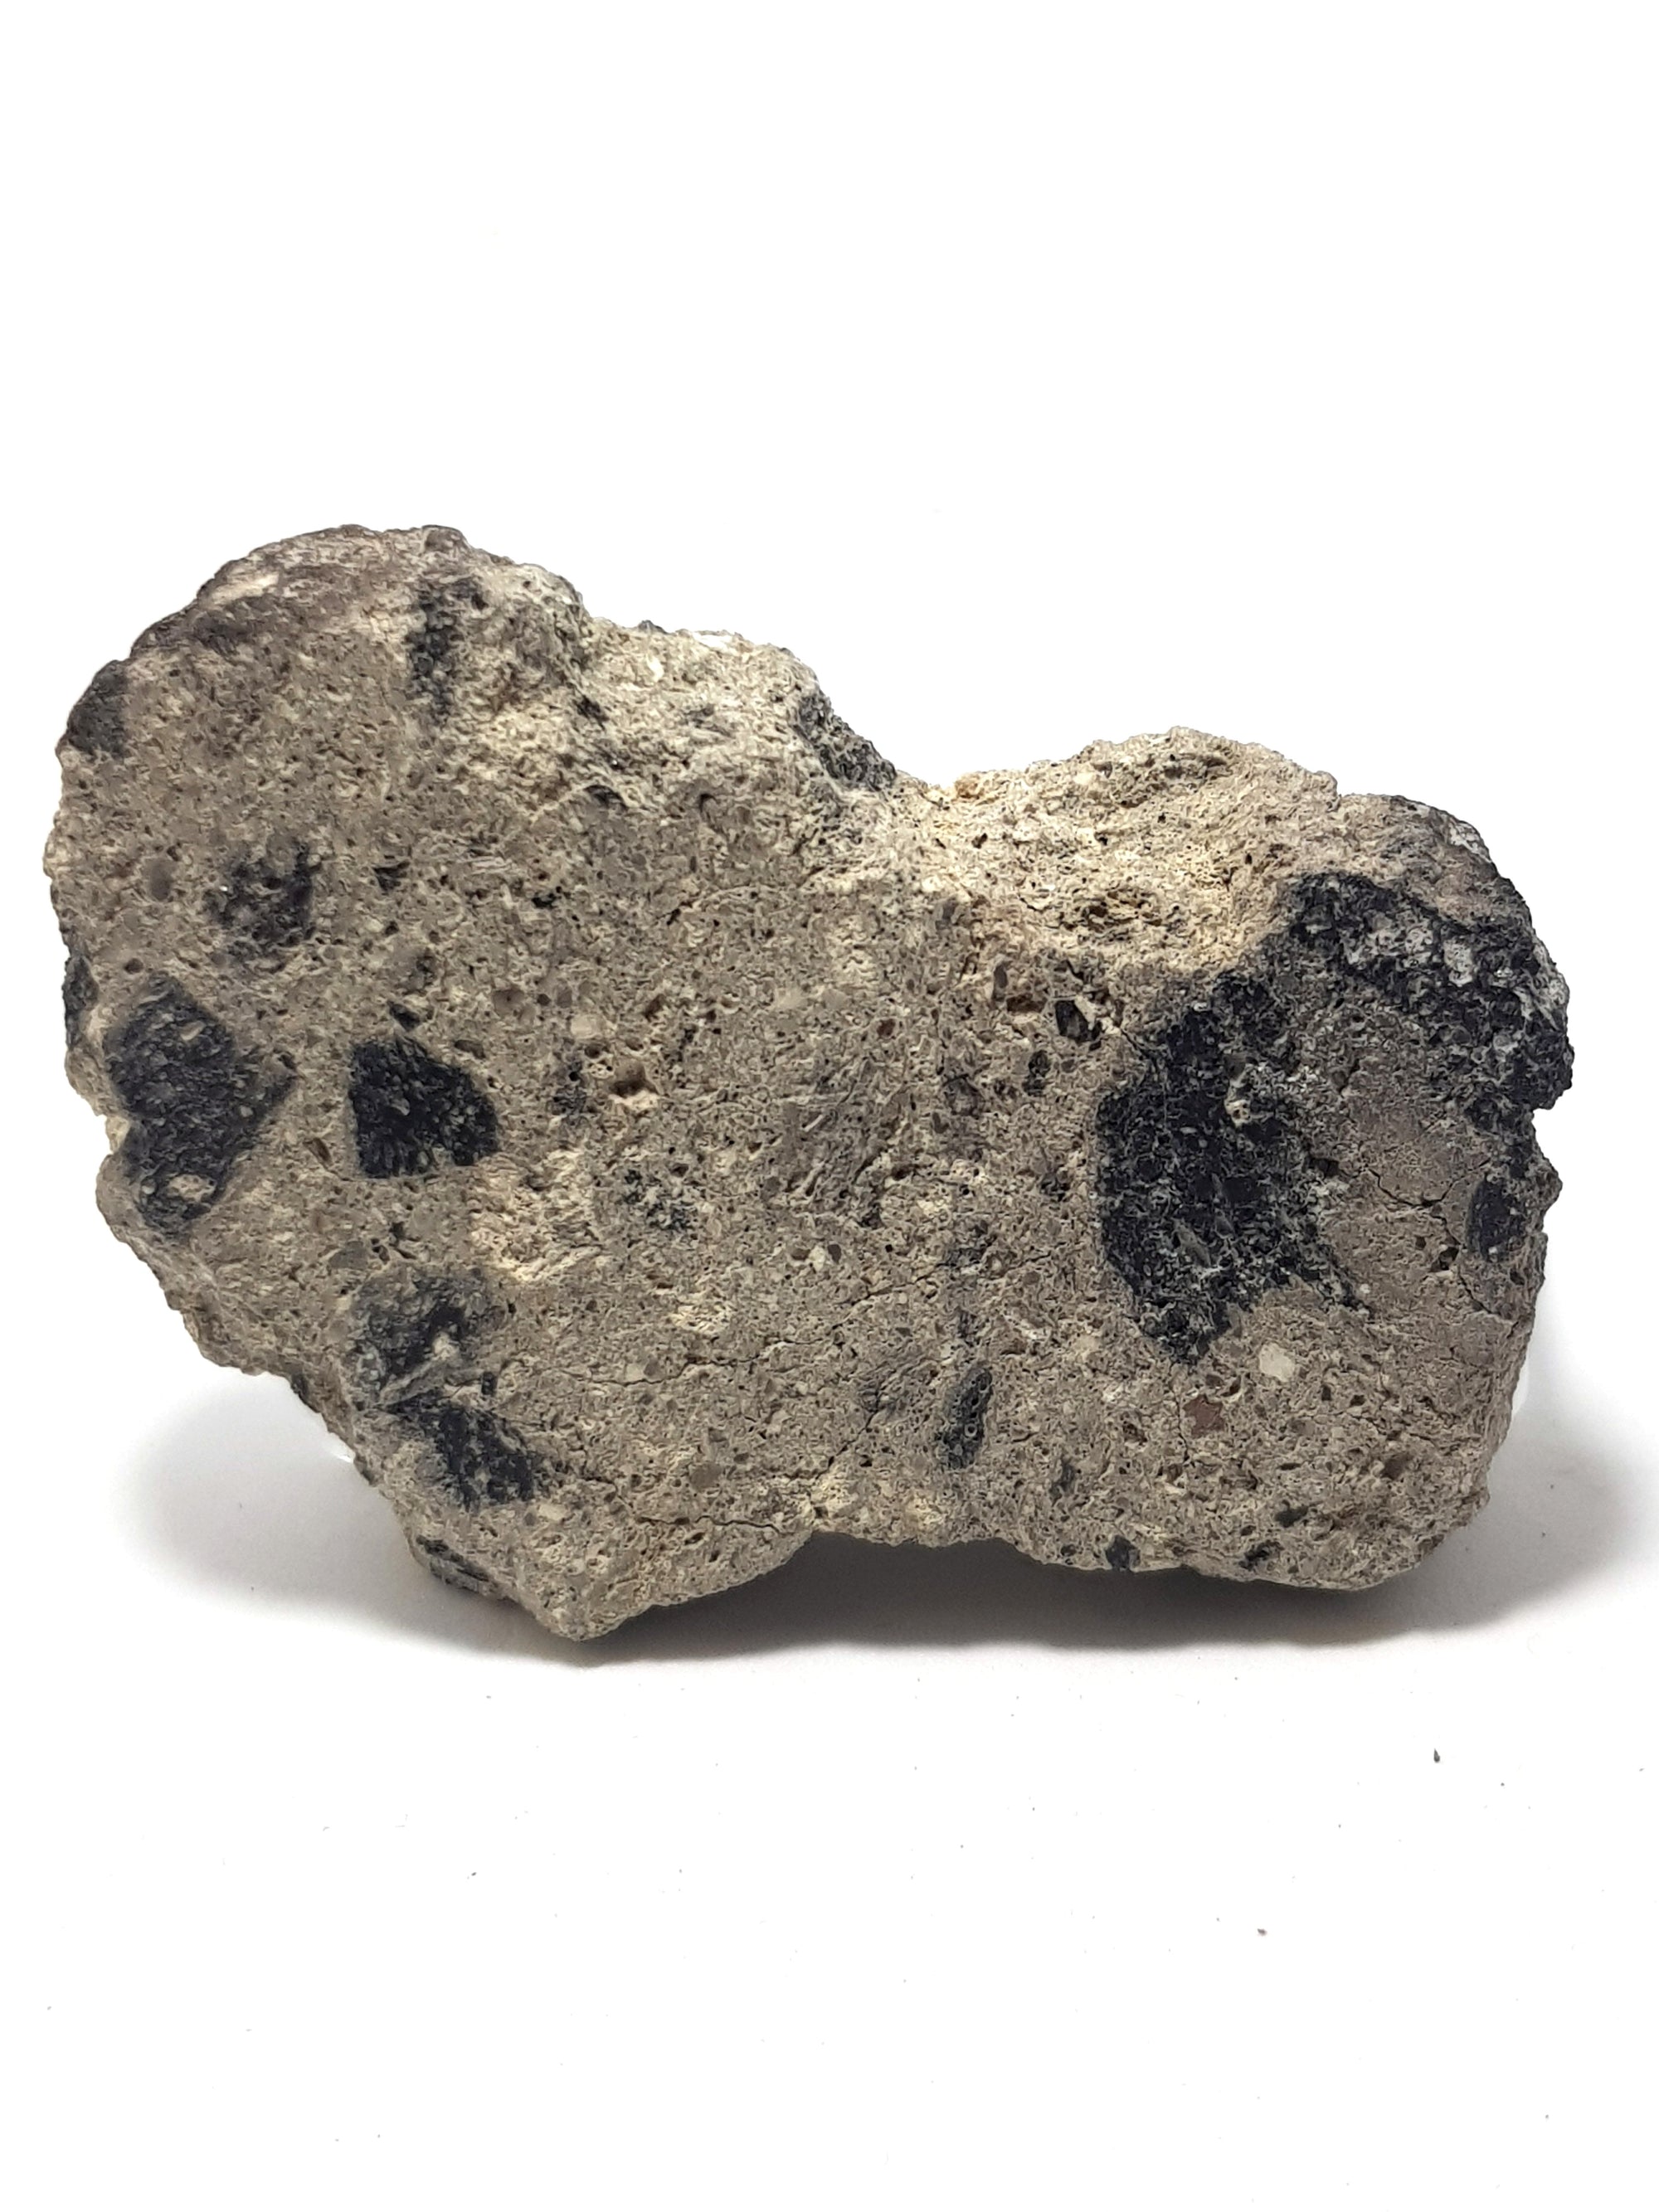 This is a slice of impact breccia from the reis crater. it largely consists of a grey/beige suevite matrix. There are several large angular clasts of a black material (about 5% of the shown surface) as well a rare inclusions of a orange material (visible in close up)